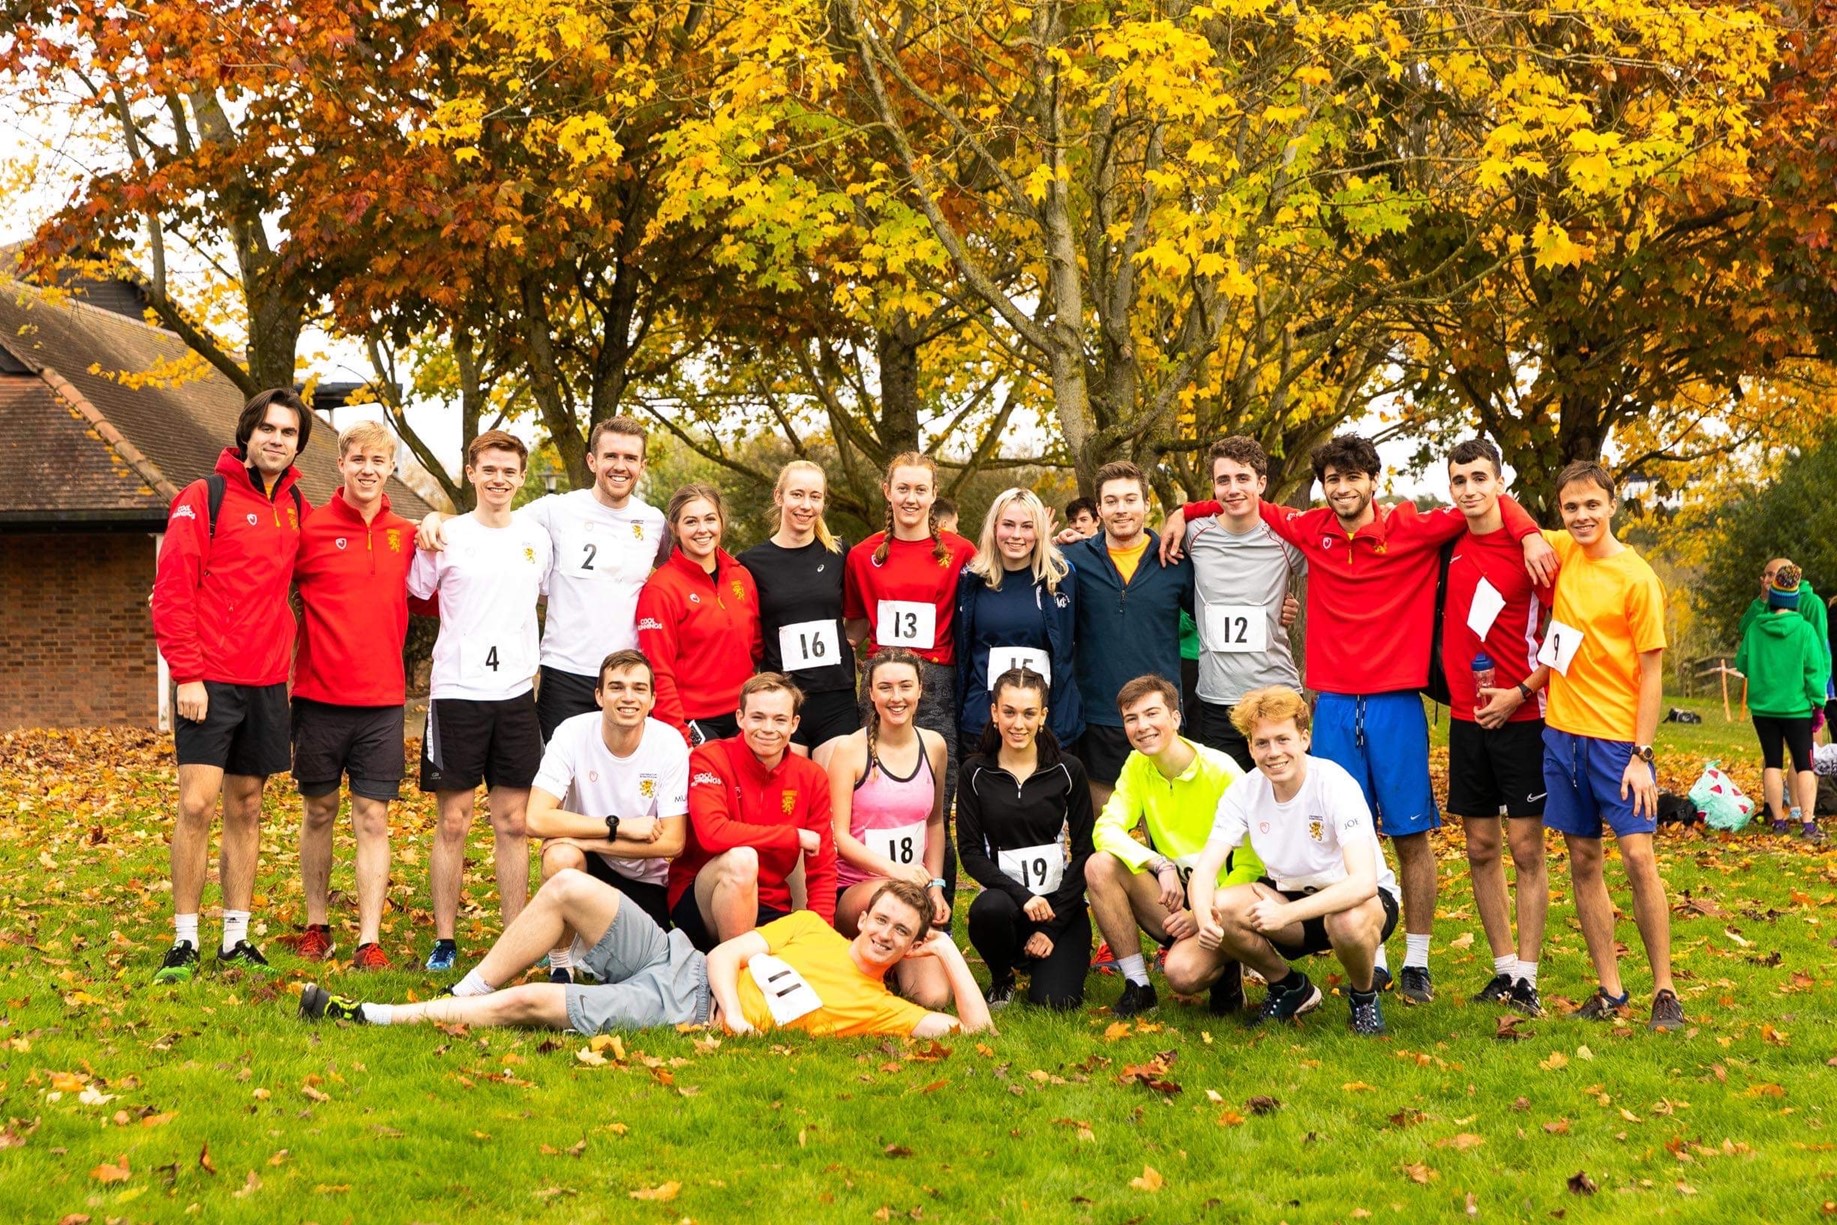 Group of runners posing for a photo